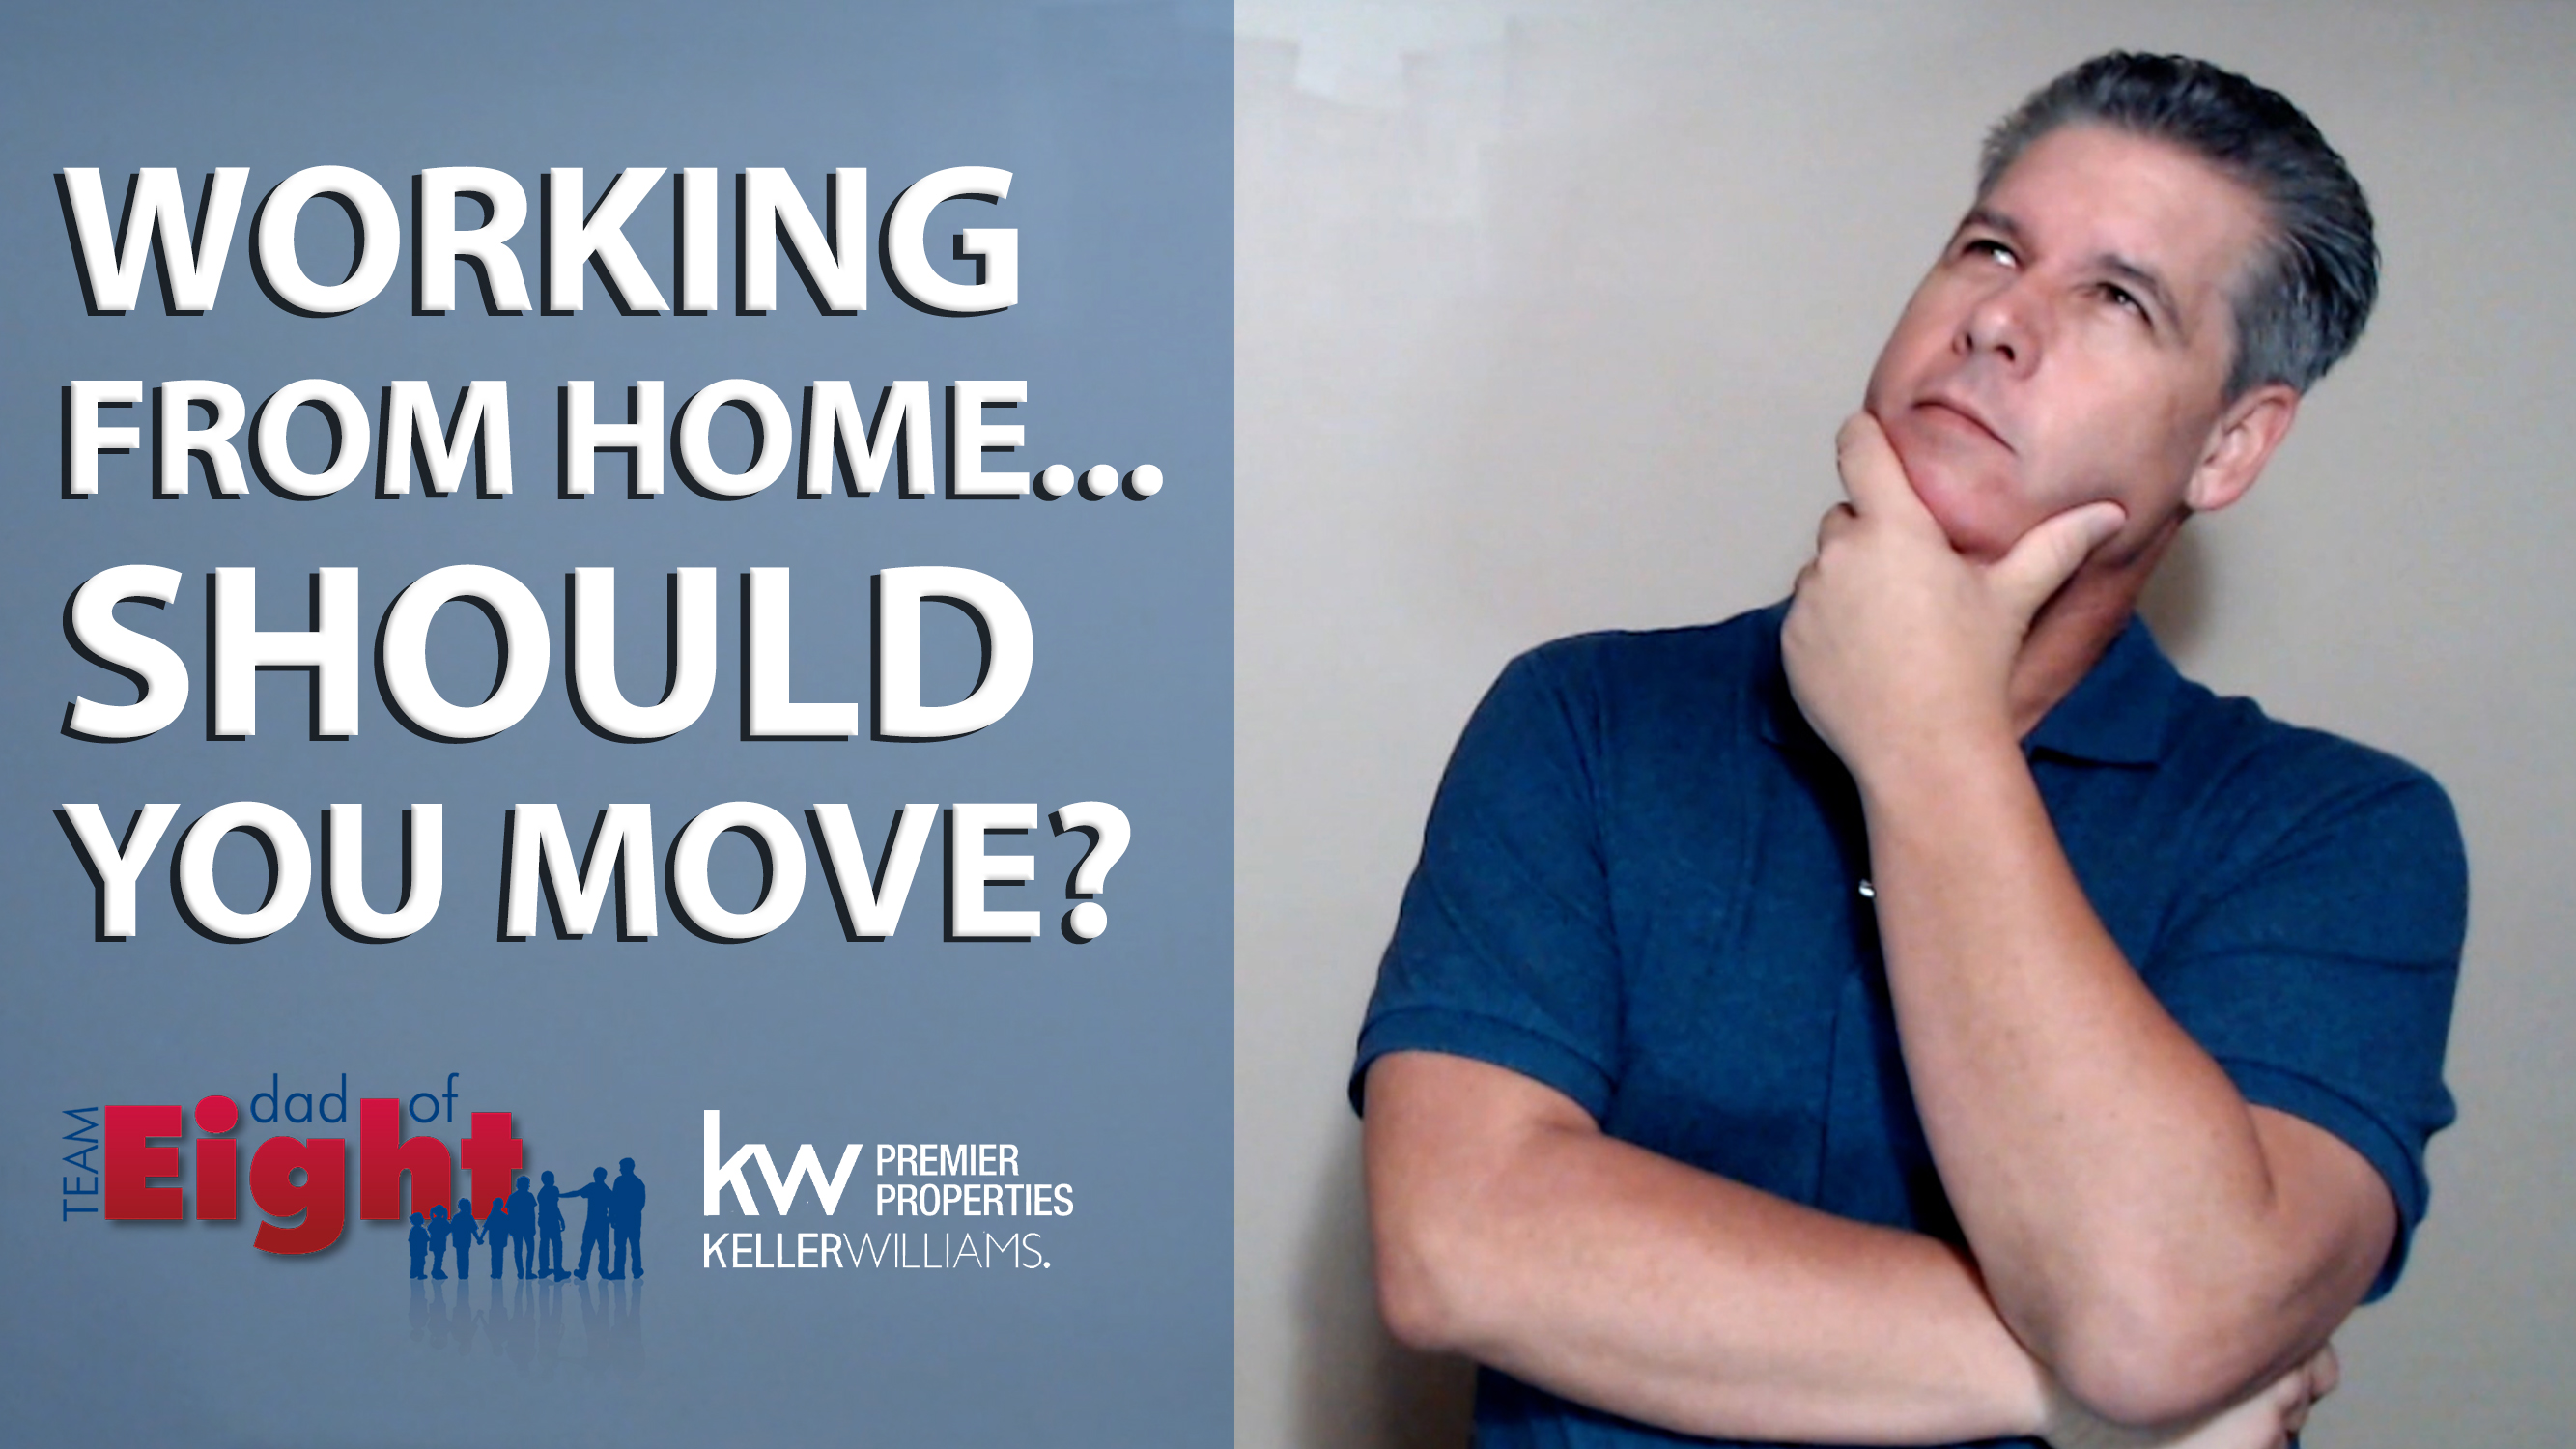 Q: If You’re Working From Home, Should You Move?